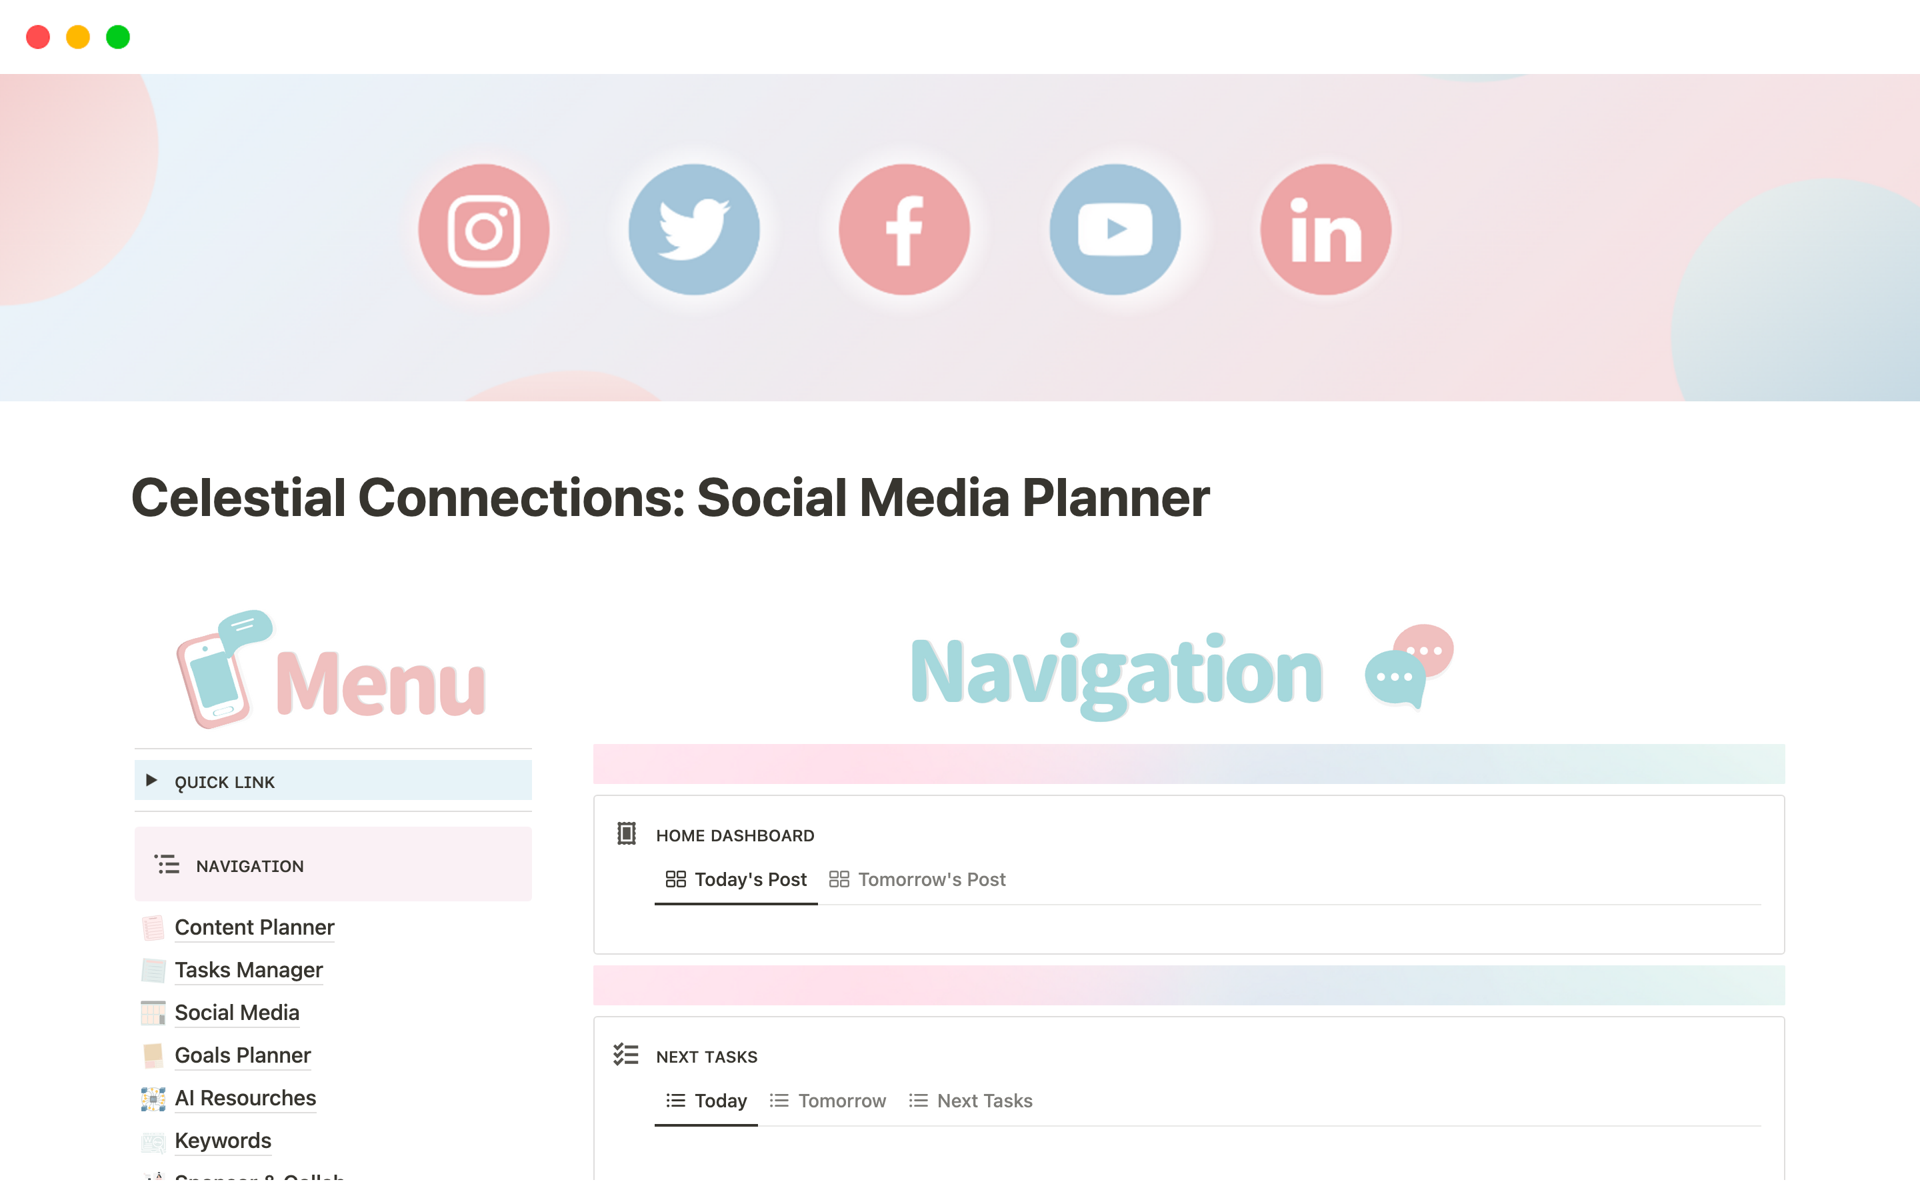 Plan and schedule your social media content